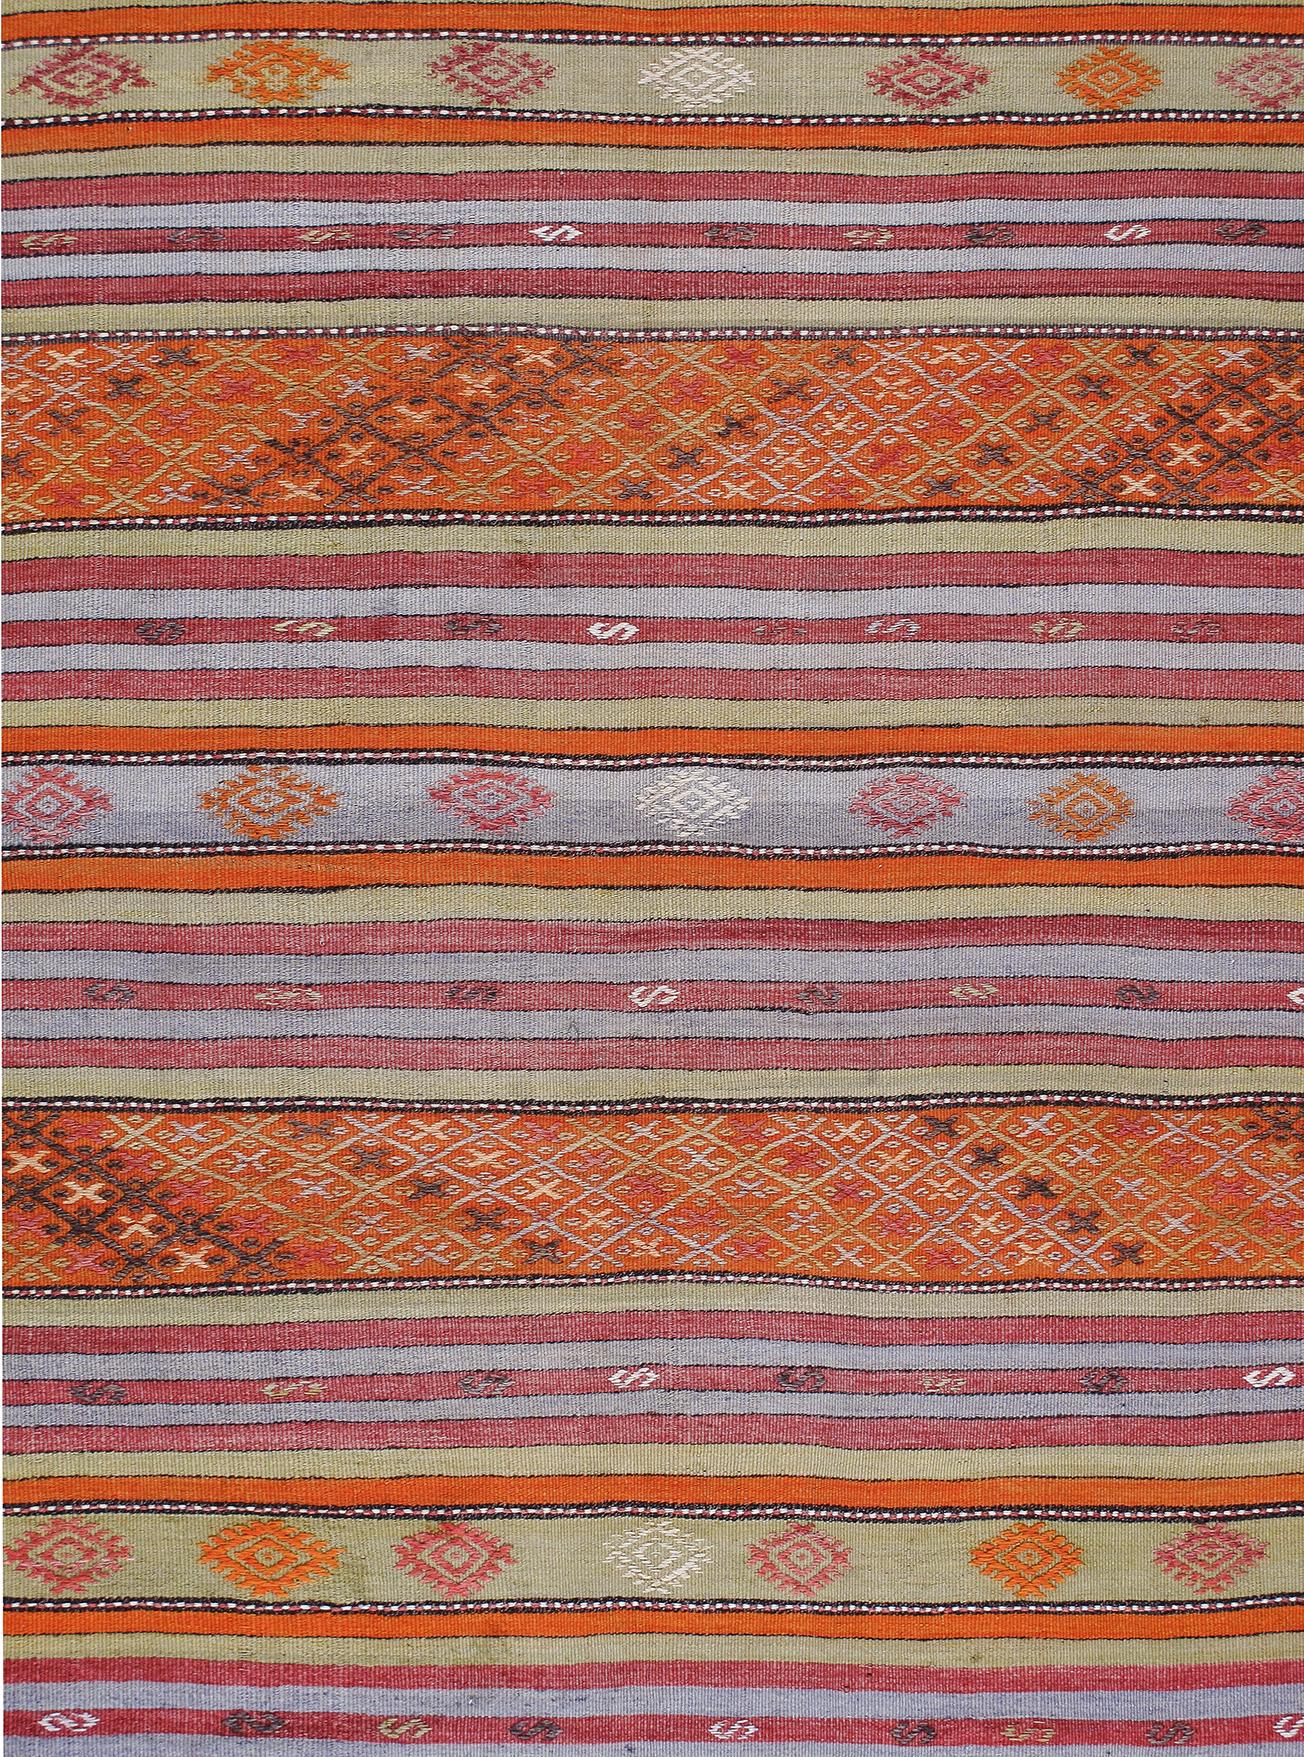 This vintage tribal flatweave rug was handmade in Turkey. The Mid-Century Modern Collection is skillfully sourced by N A S I R I and exclusive to our showroom. These flatweaves embody the minimalist sophistication that emerged in the mid-20th